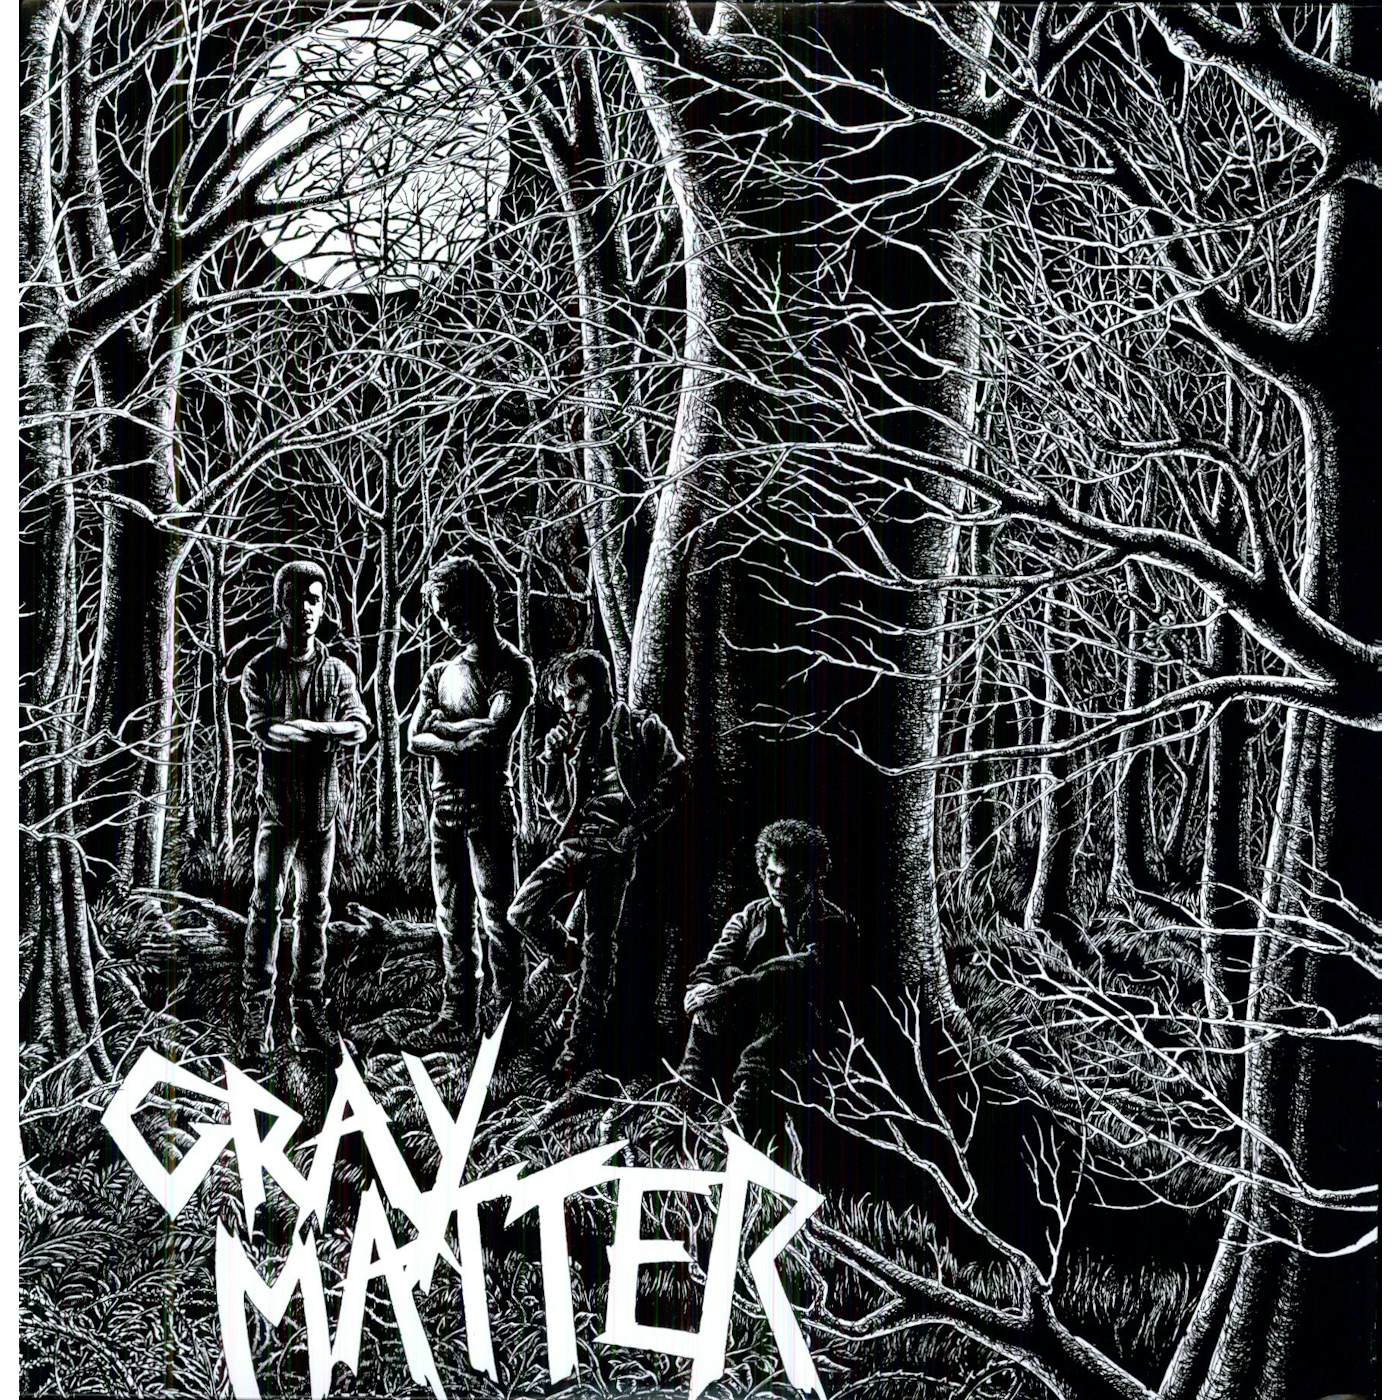 Gray Matter Food For Thought Vinyl Record